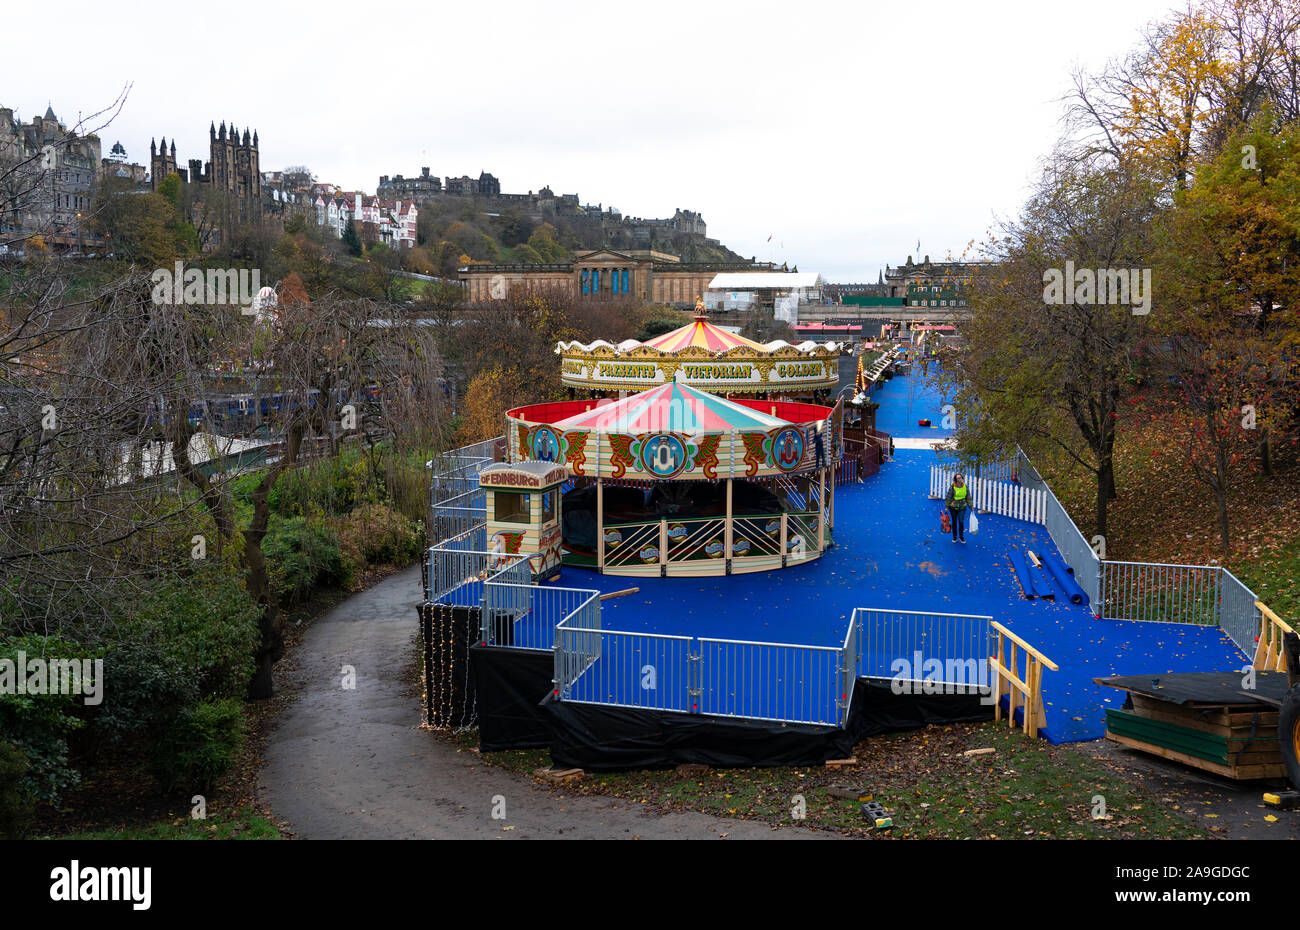 Edinburgh, Scotland, UK. 15th November 2019. General view of controversial Edinburgh Christmas Market seen on the day before opening. The market has nearly doubled in size this year and much of it has been built on a large elevated platform for the first time which has angered many residents who fear that Princes Street Gardens are being damaged. Concerns also raised that the proper planning application channels were not adhered to. The market opens on 16th November. Iain Masterton/Alamy Live News. Stock Photo